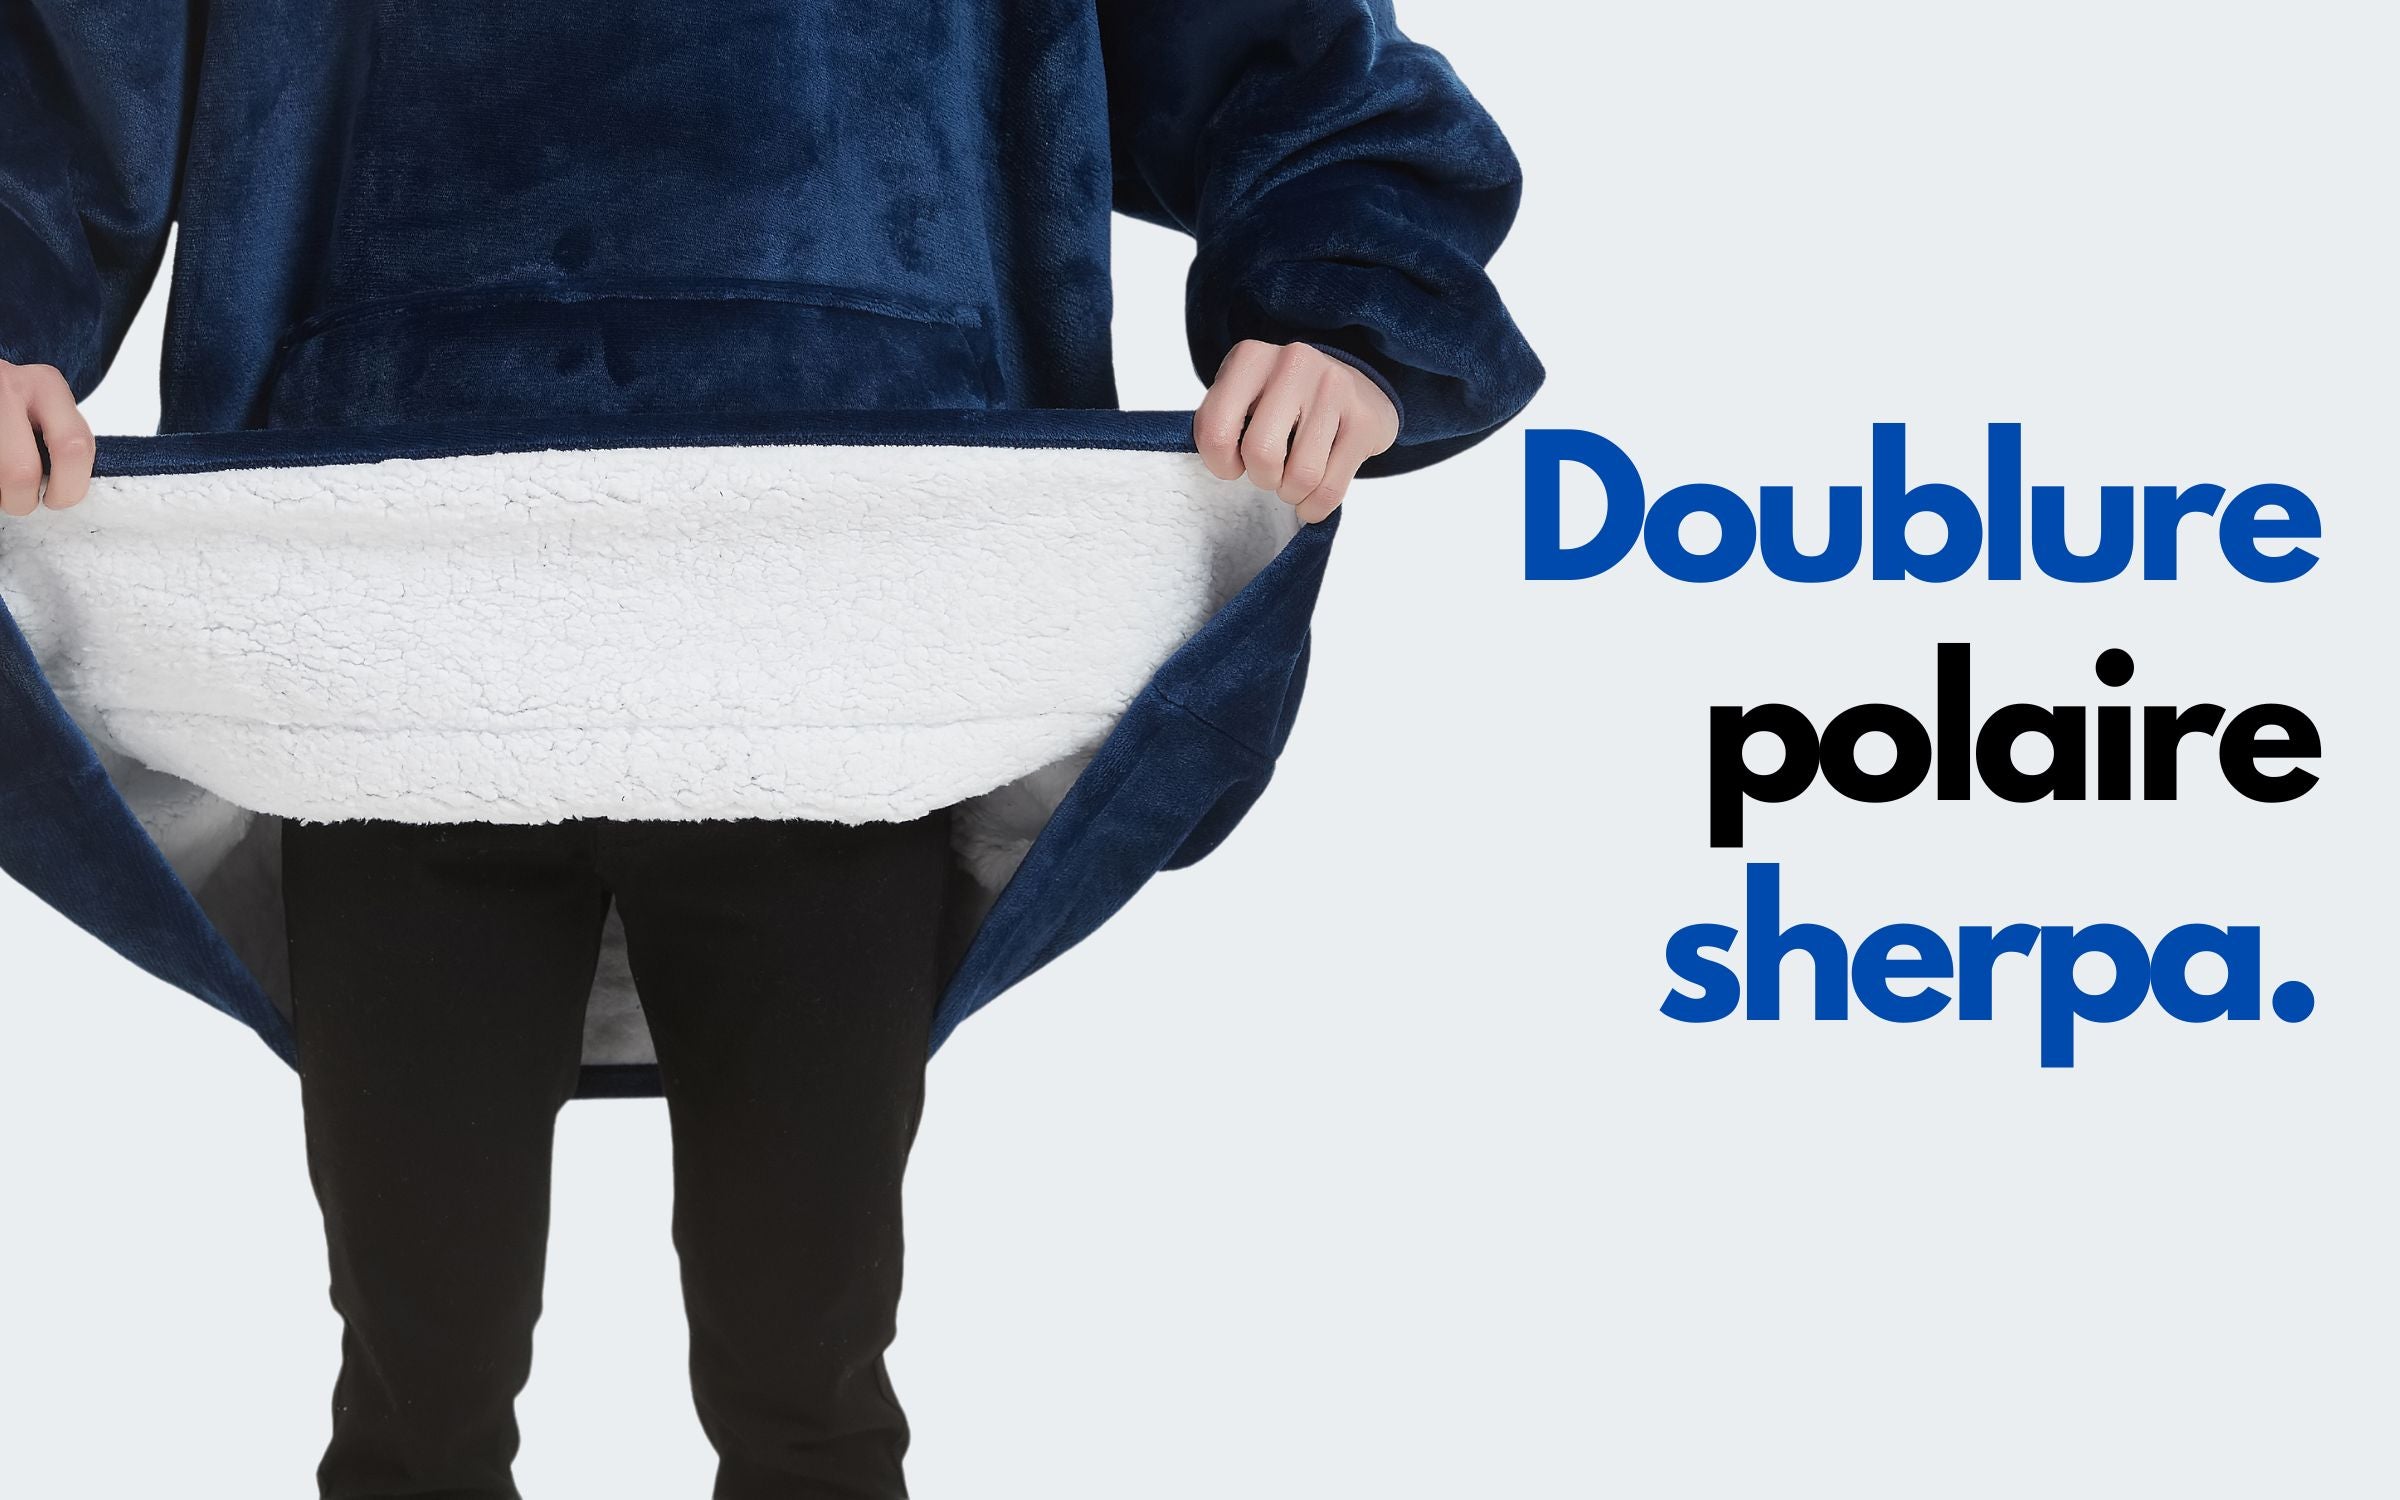 Doublure Polaire Sherpa chaude moelleuse cozy The Oversized Hoodie Homme bleu marine